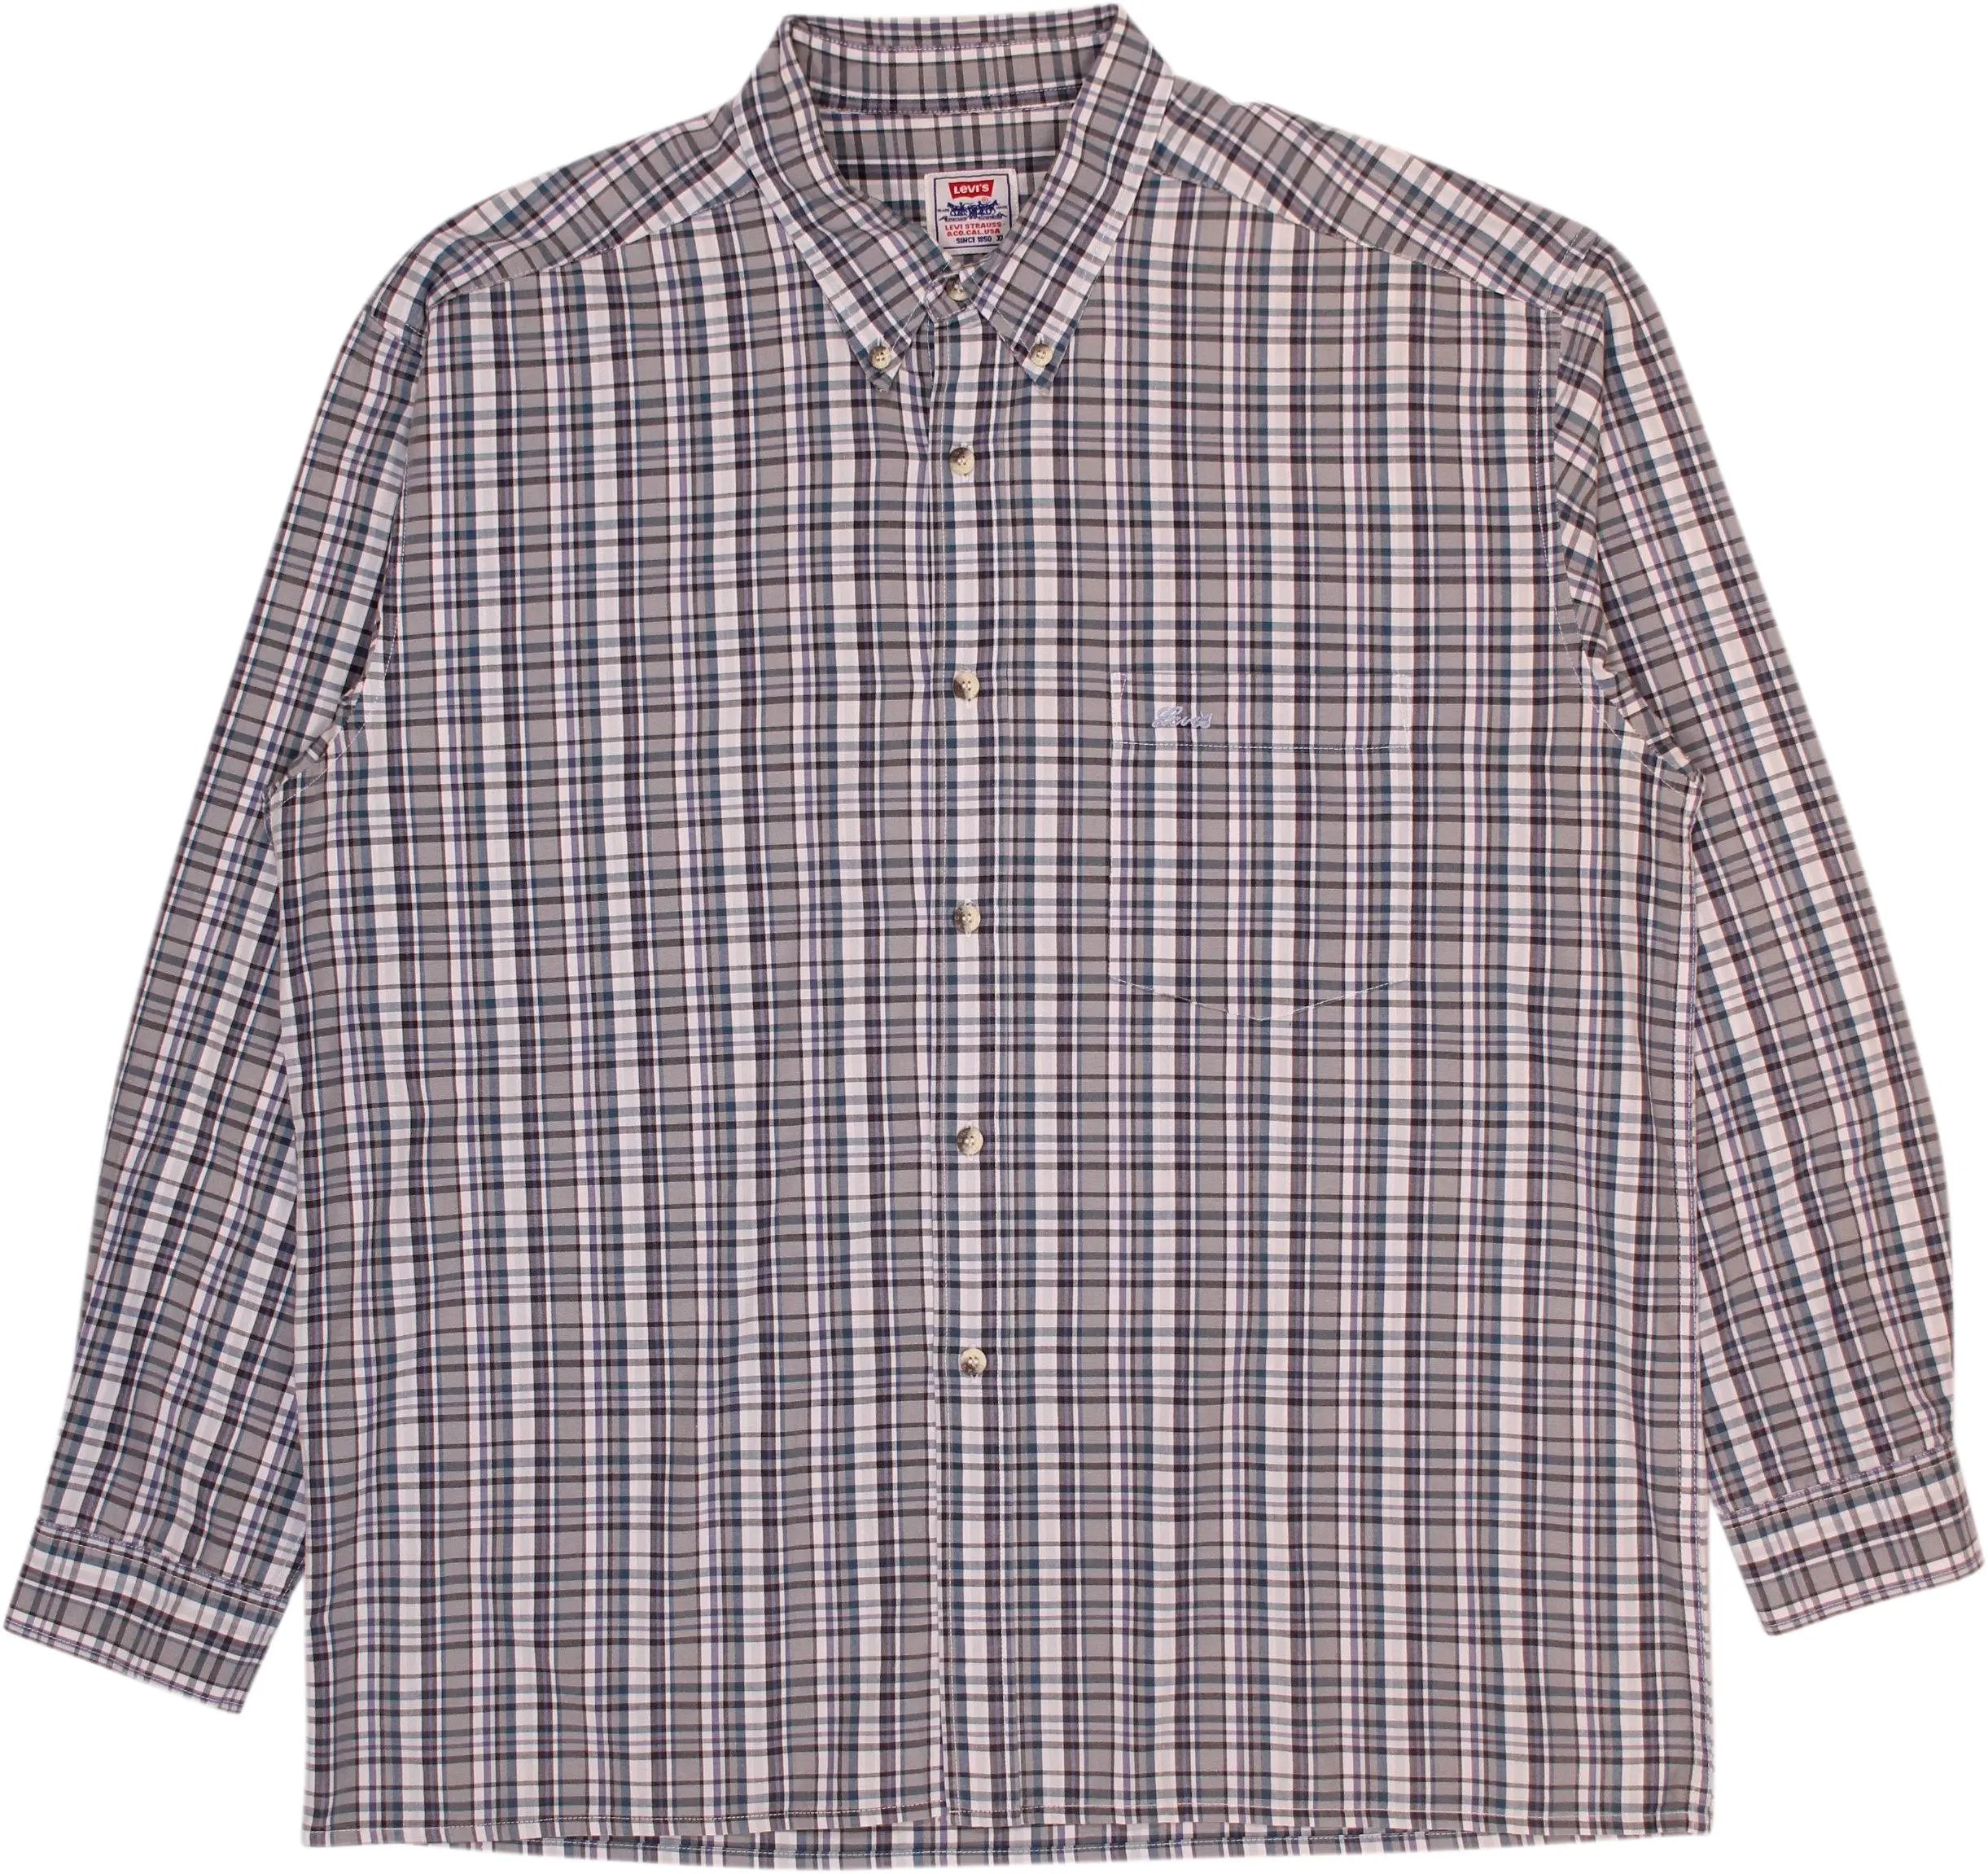 Levi's - Grey Checked Shirt by Levi's- ThriftTale.com - Vintage and second handclothing